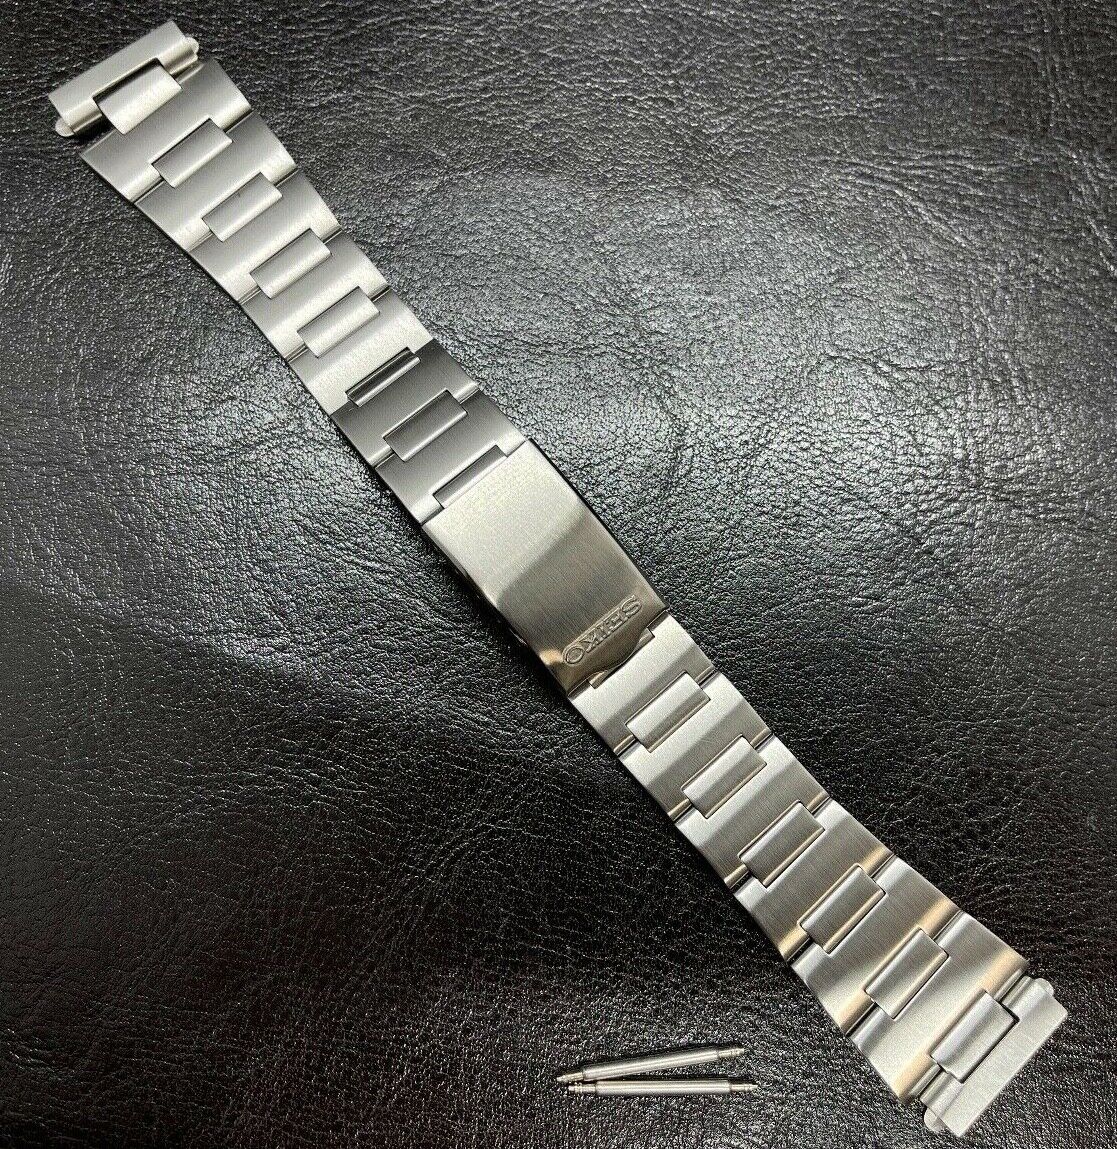 Bracelet For Seiko Band 6105-8000 6105-8009 stainless W  End Link diver bar19mm